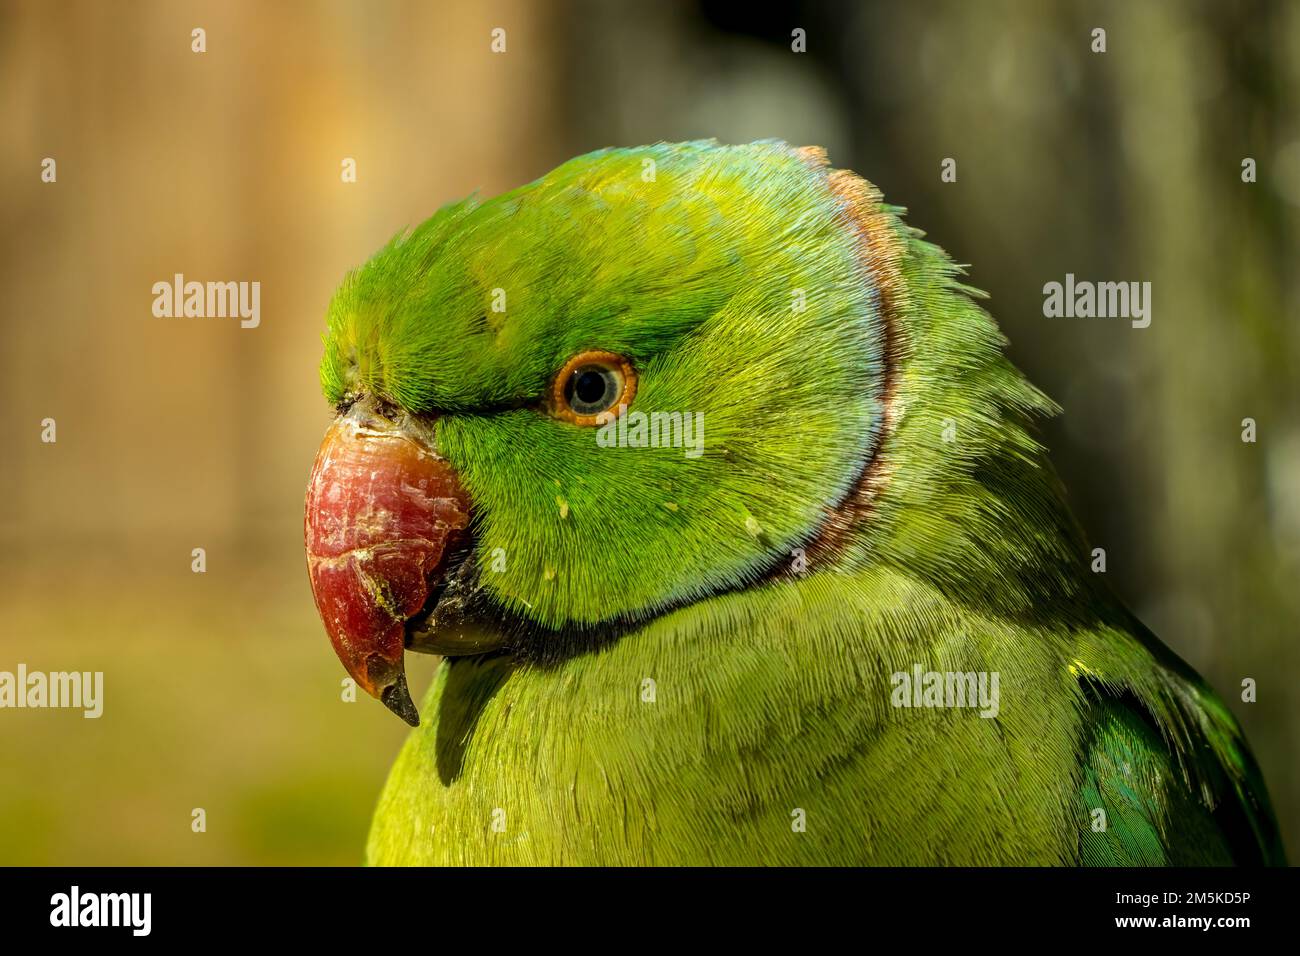 A closeup of an Echo parakeet, Psittacula eques green parrot against a blurred background Stock Photo